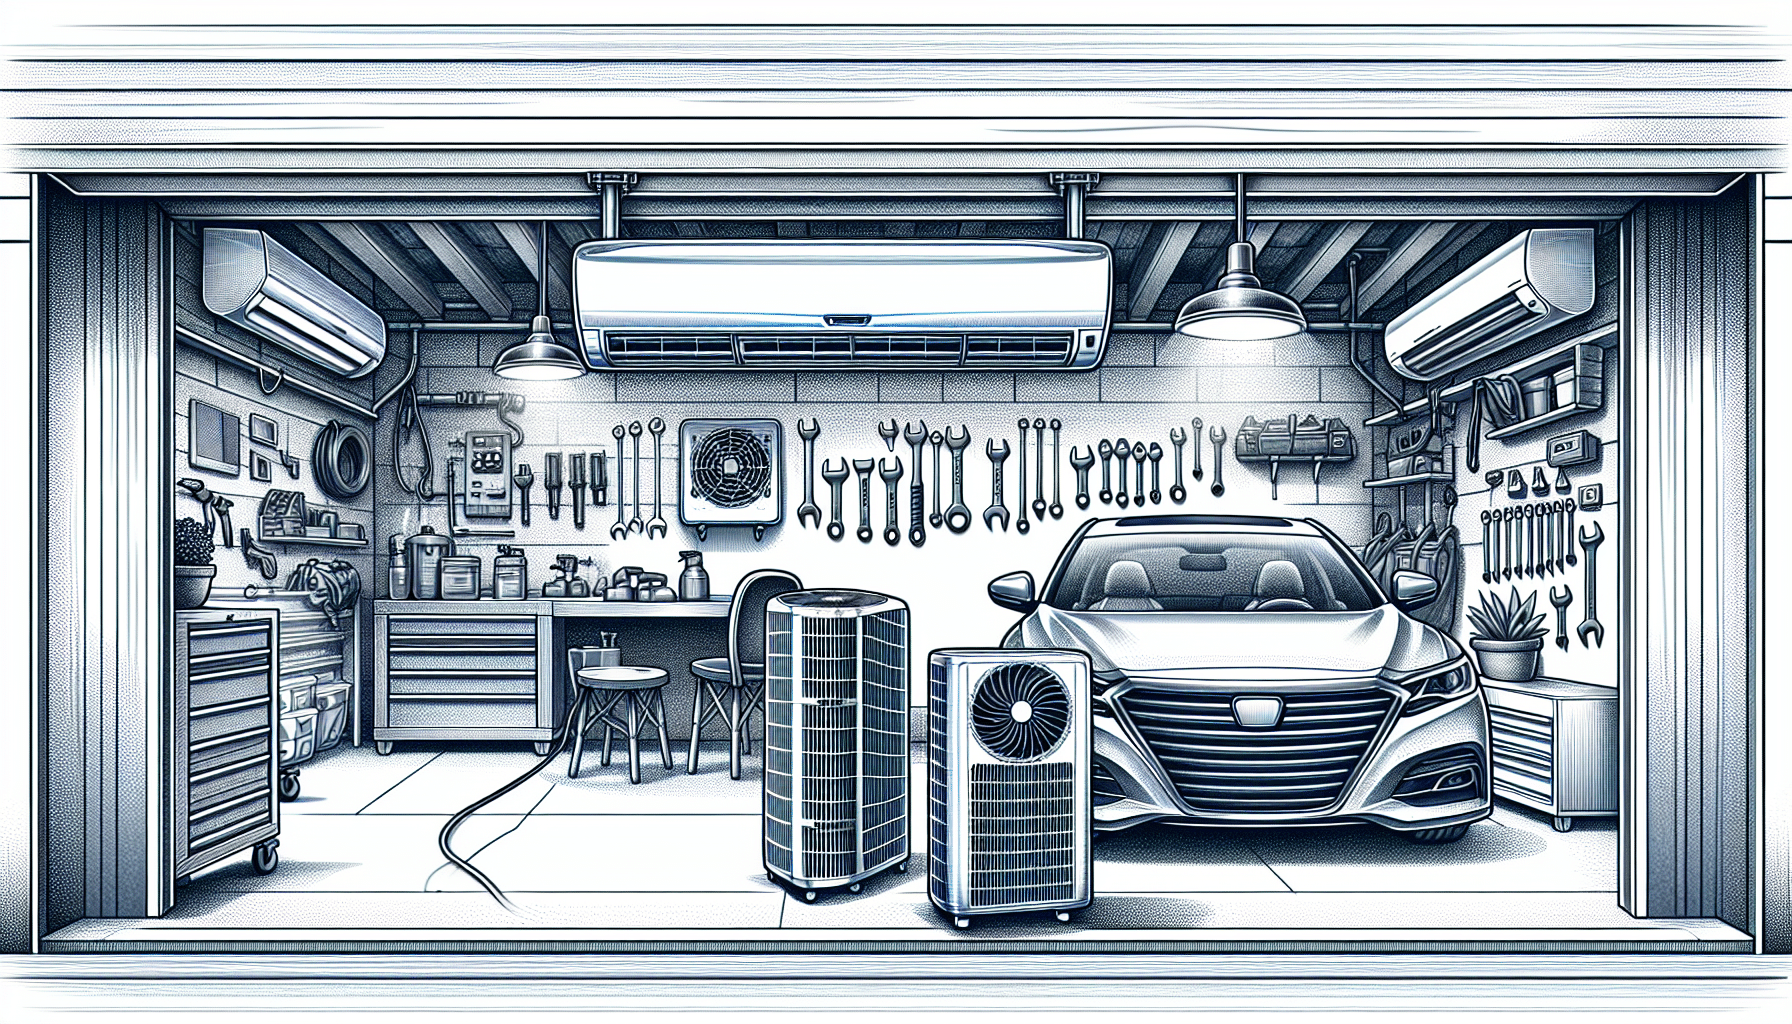 Illustration of air conditioning and mini-split systems in a garage